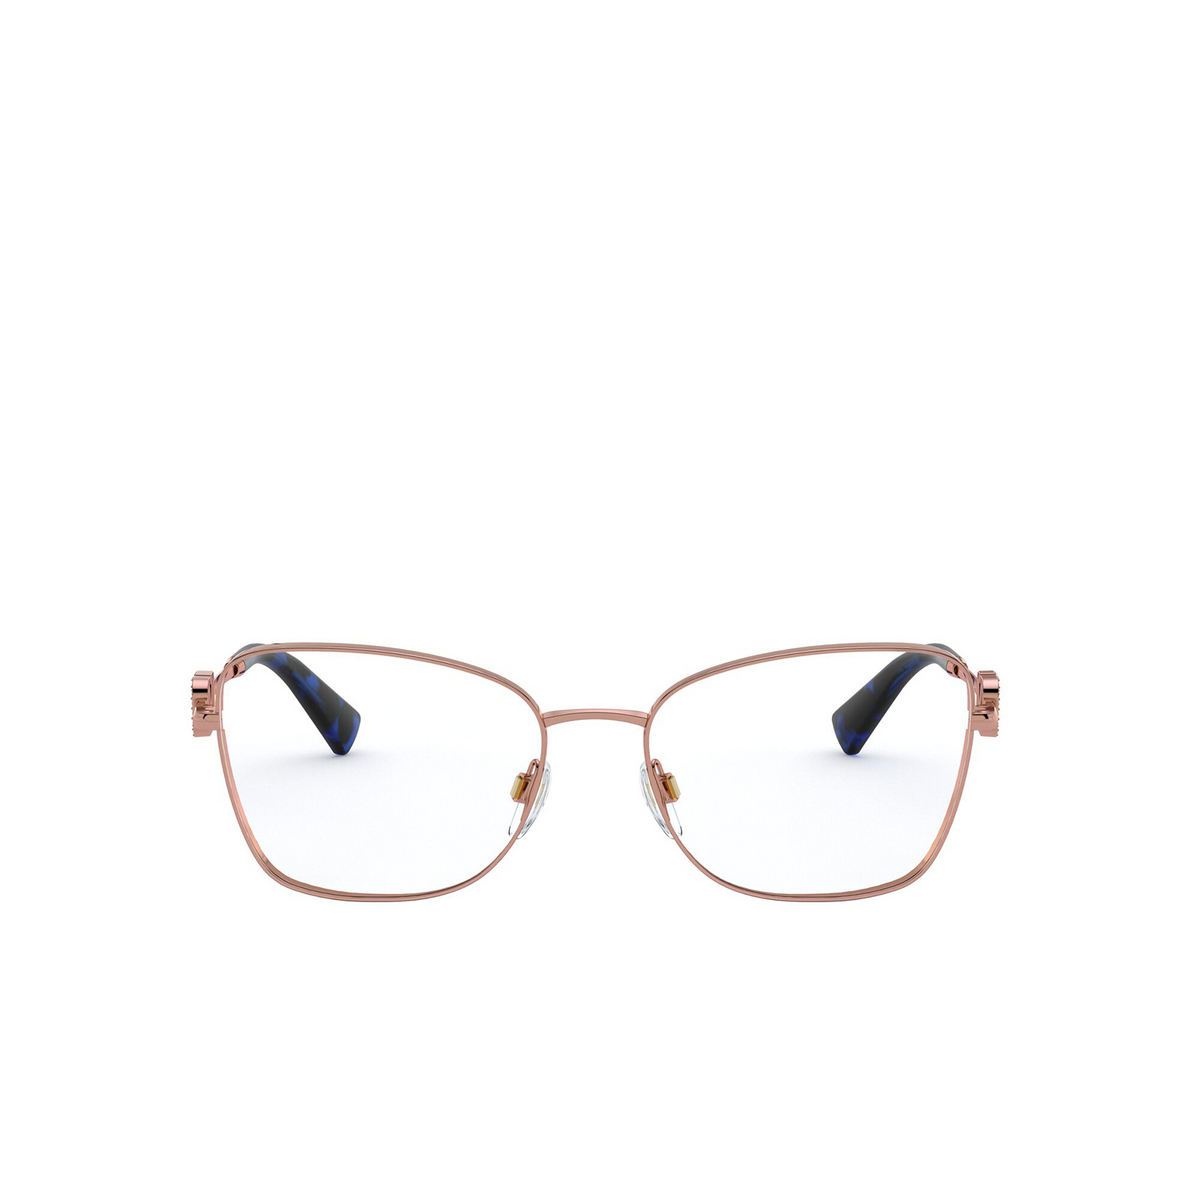 Valentino® Butterfly Eyeglasses: VA1019 color Rose Gold 3004 - front view.